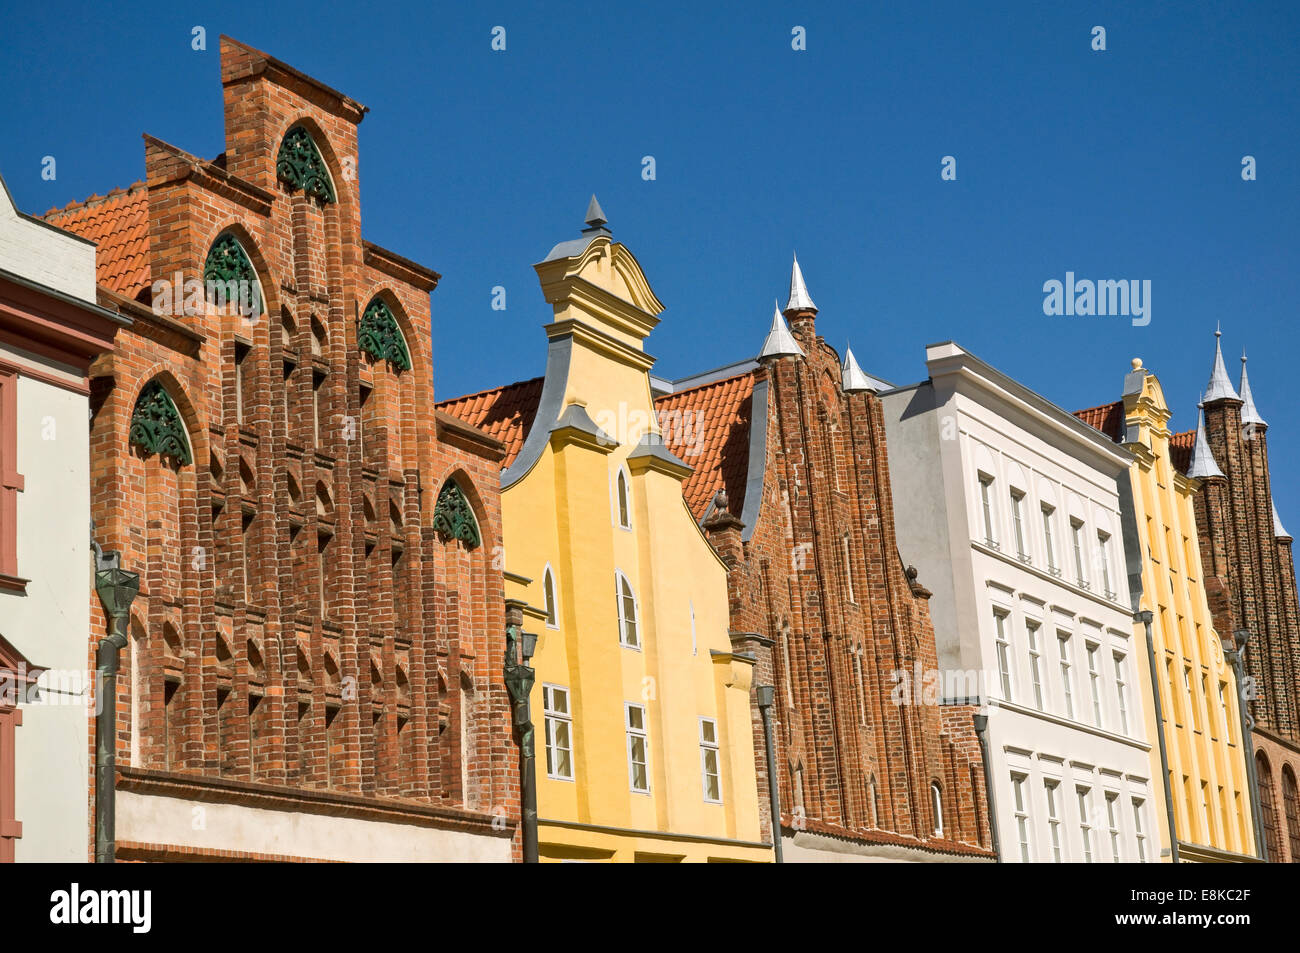 Facades in the Historic UNESCO town of Stralsund, Mecklenburg Western Pomerania, Germany. Stock Photo